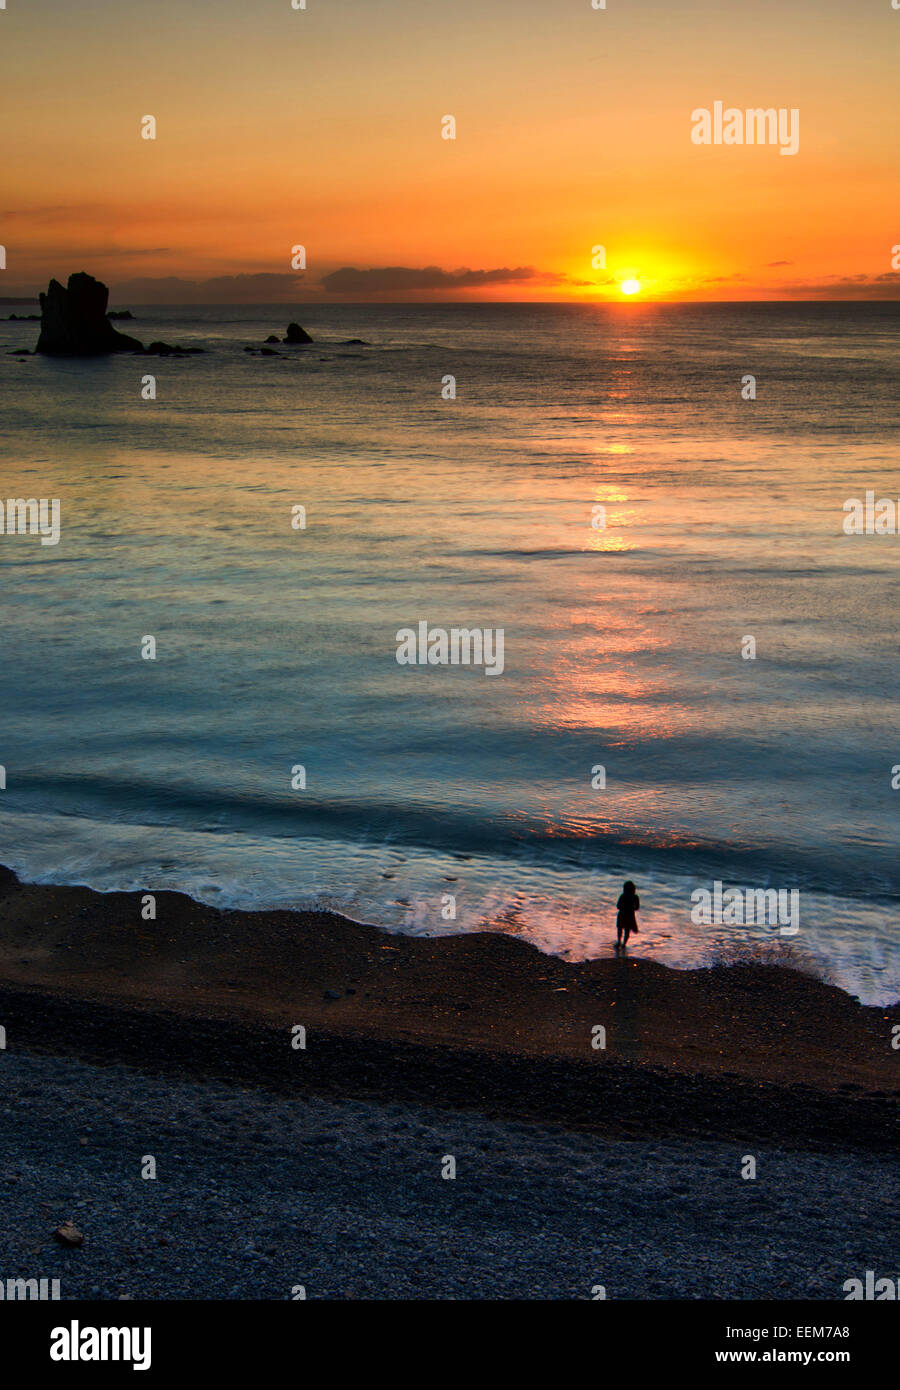 Spain, Asturias, Playa del Silencio, Seascape and silhouette person at sunset Stock Photo